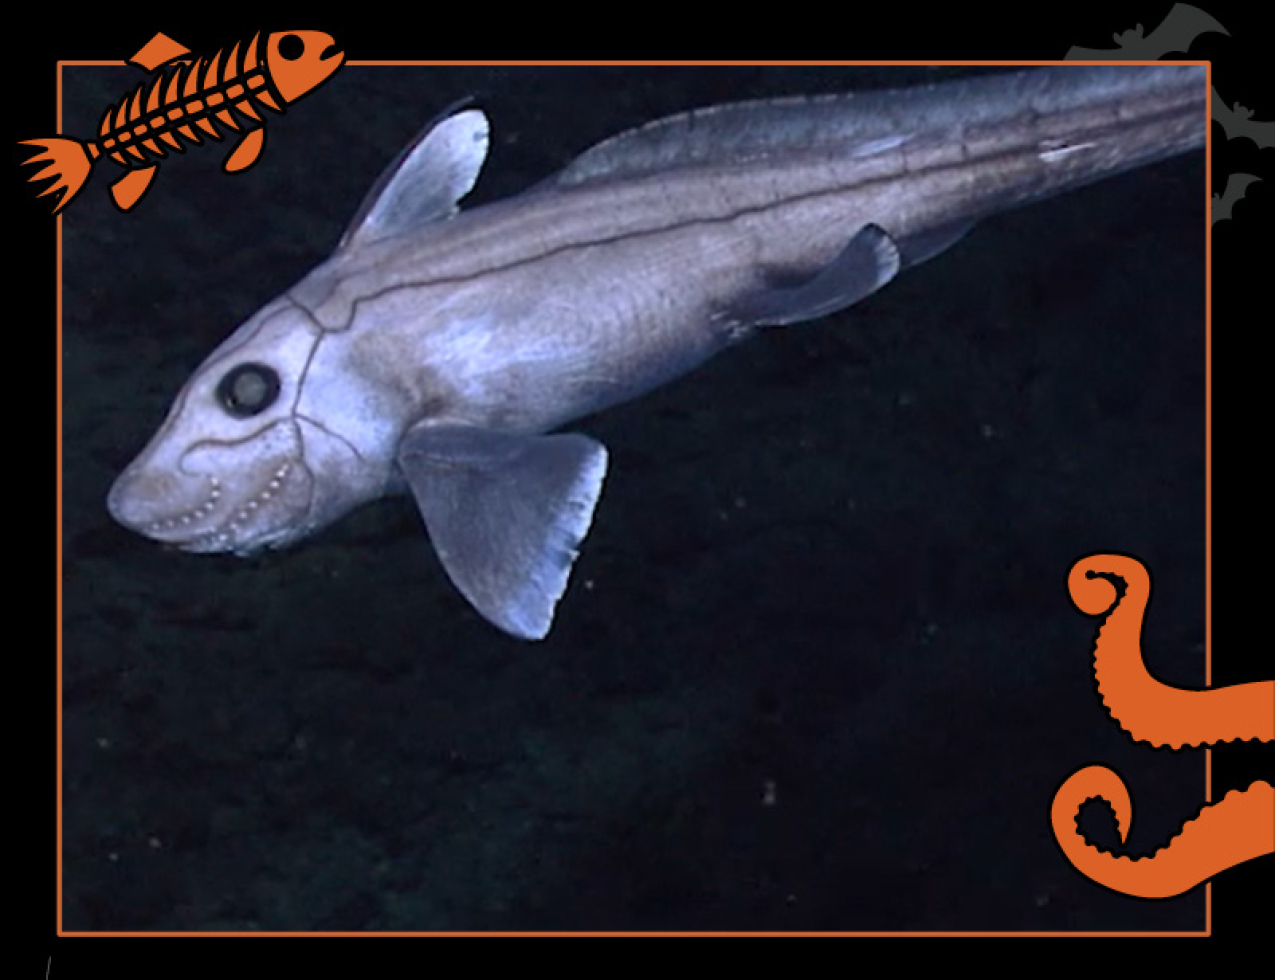 A streamlined grey fish swims in the deep ocean. Border of the photo is black with orange sea creature graphics of octopus tentacles and a fish skeleton. Text: Ghoulish ghost shark, #NOAASpookyScience with NOAA logo.